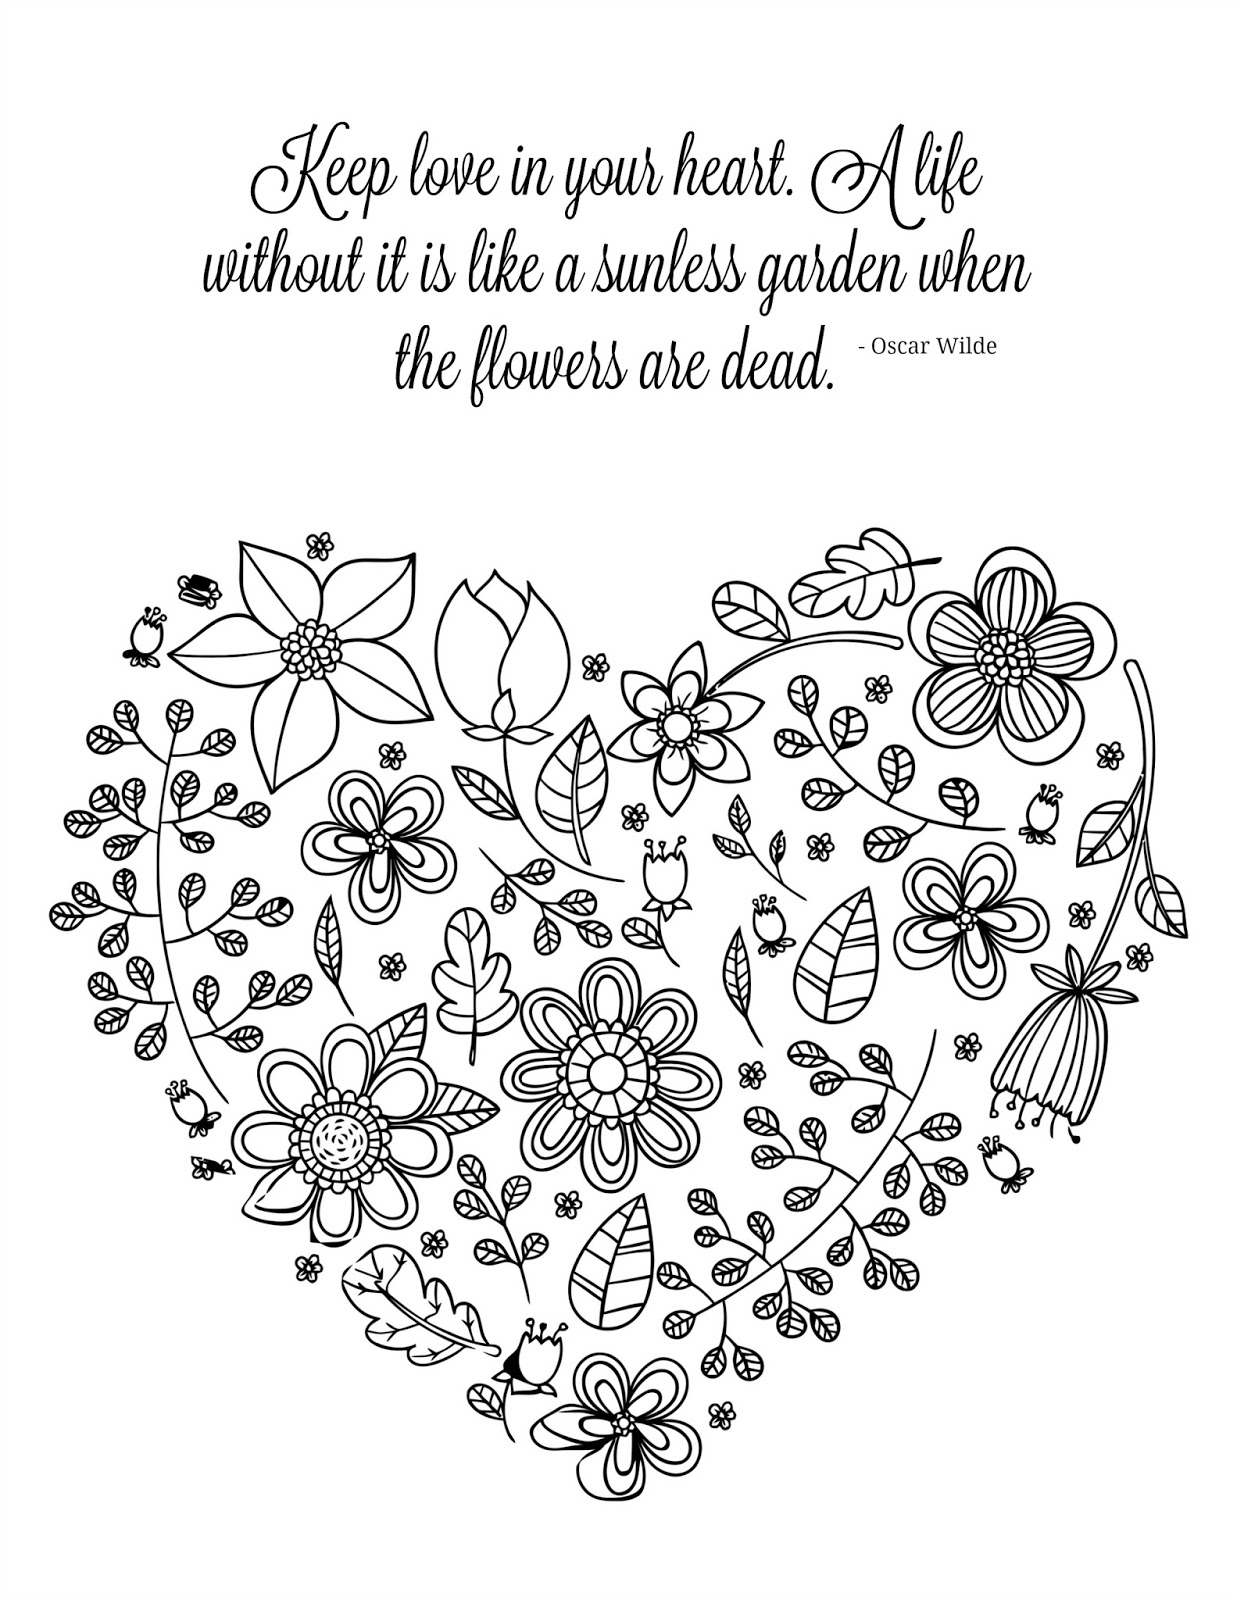 CJO Photo Inspirational Coloring Page Keep Love in Your ...